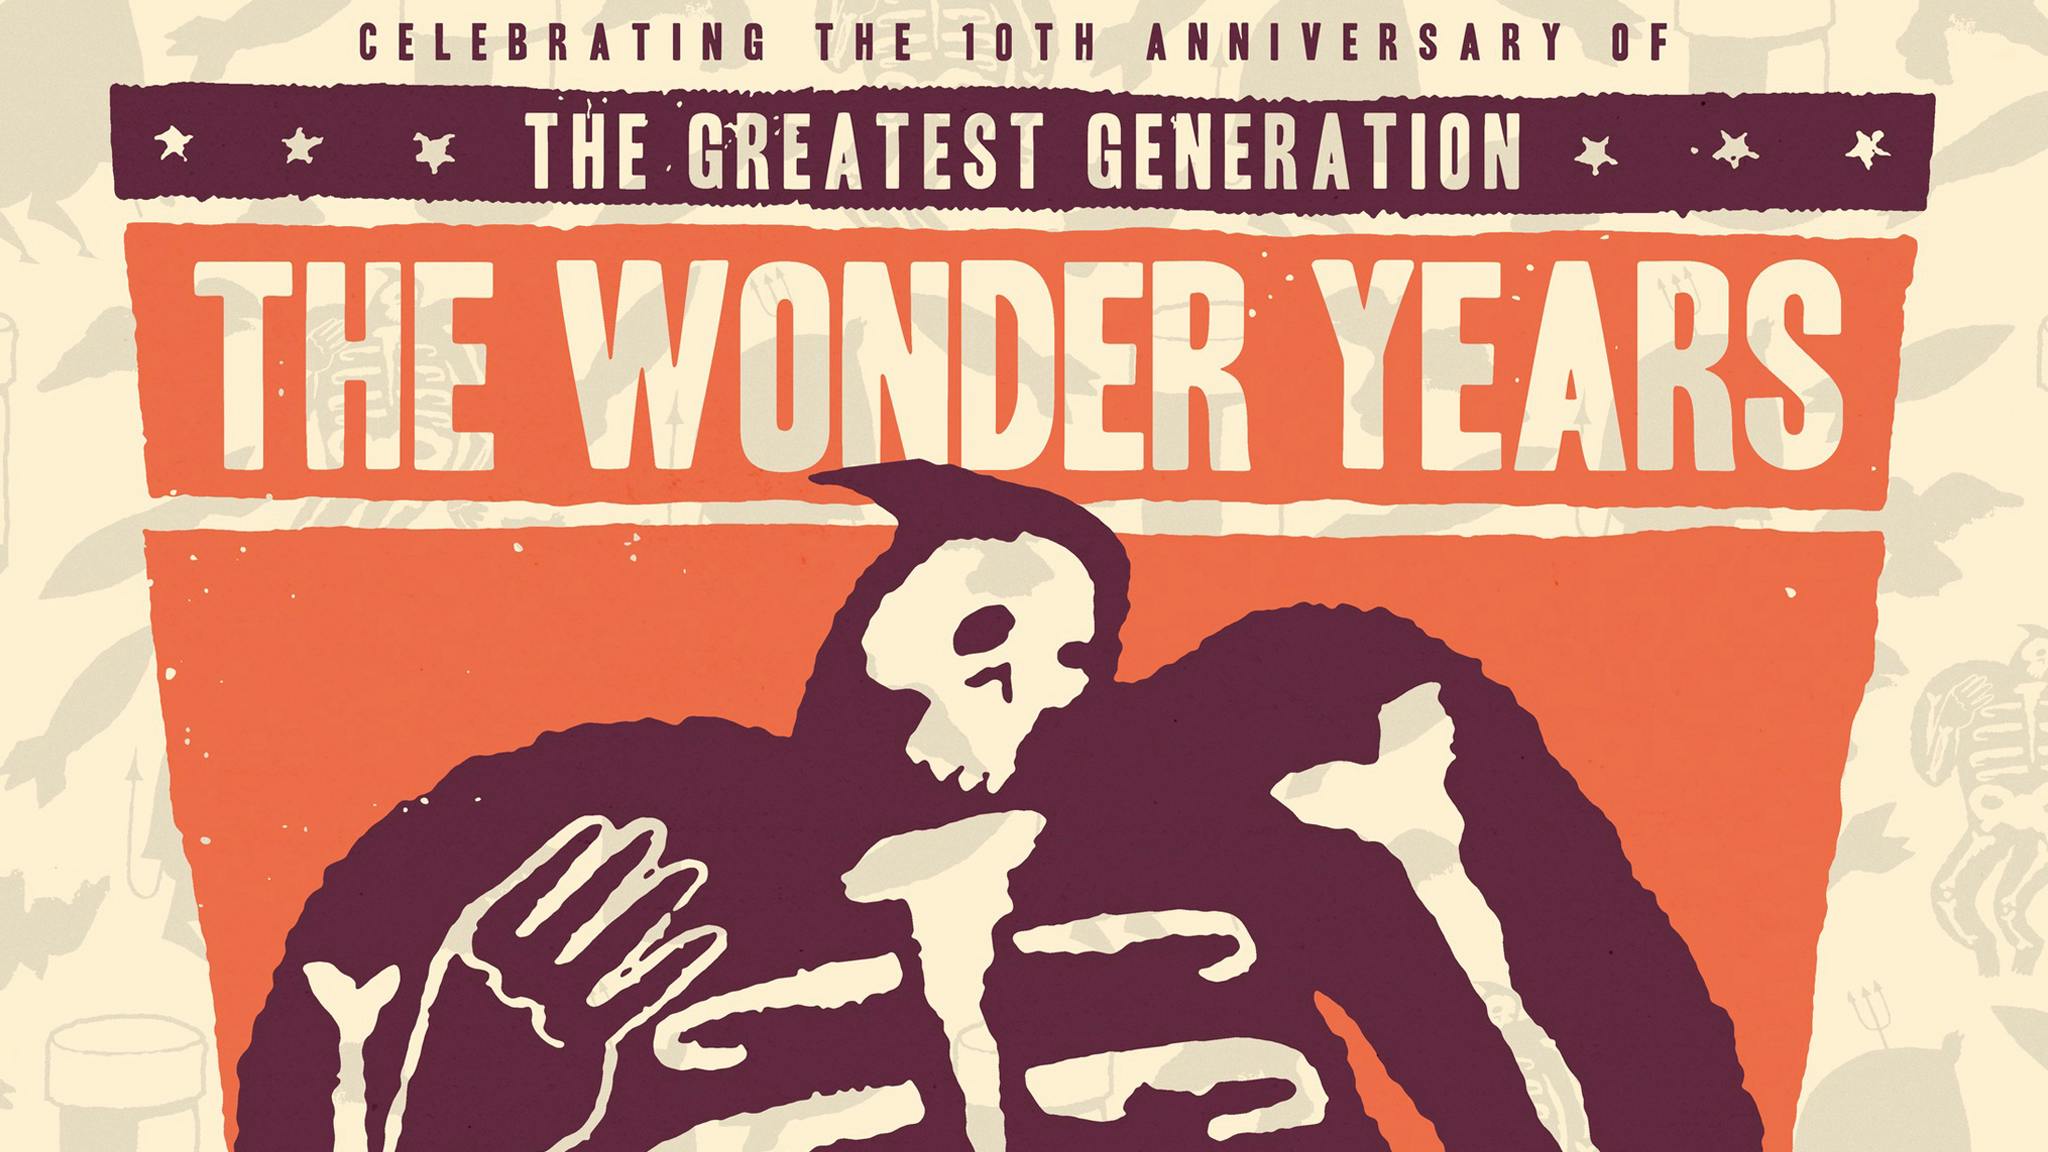 The Wonder Years announce The Greatest Generation 10th anniversary UK tour